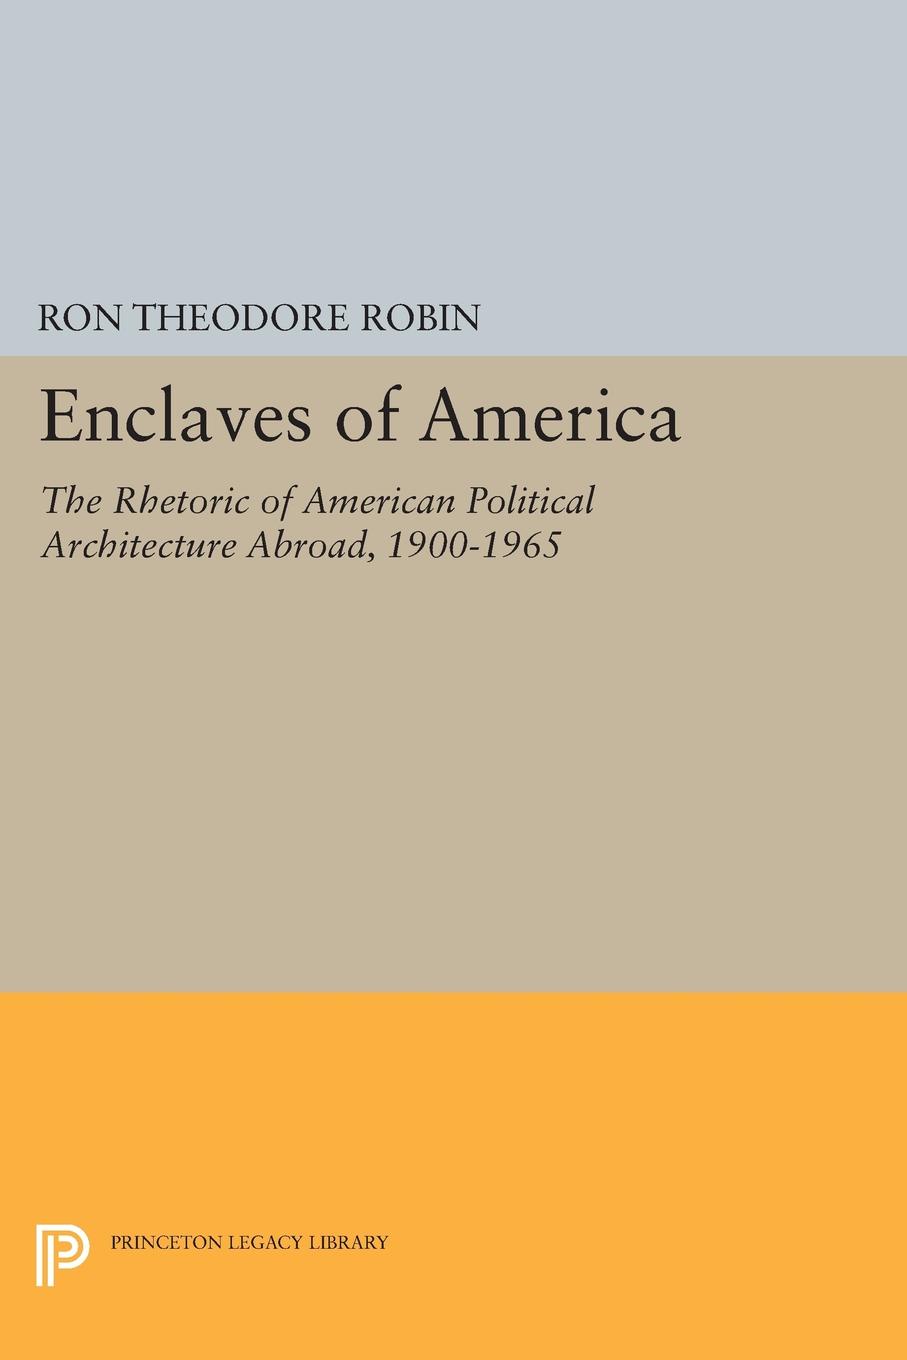 Enclaves of America. The Rhetoric of American Political Architecture Abroad, 1900-1965